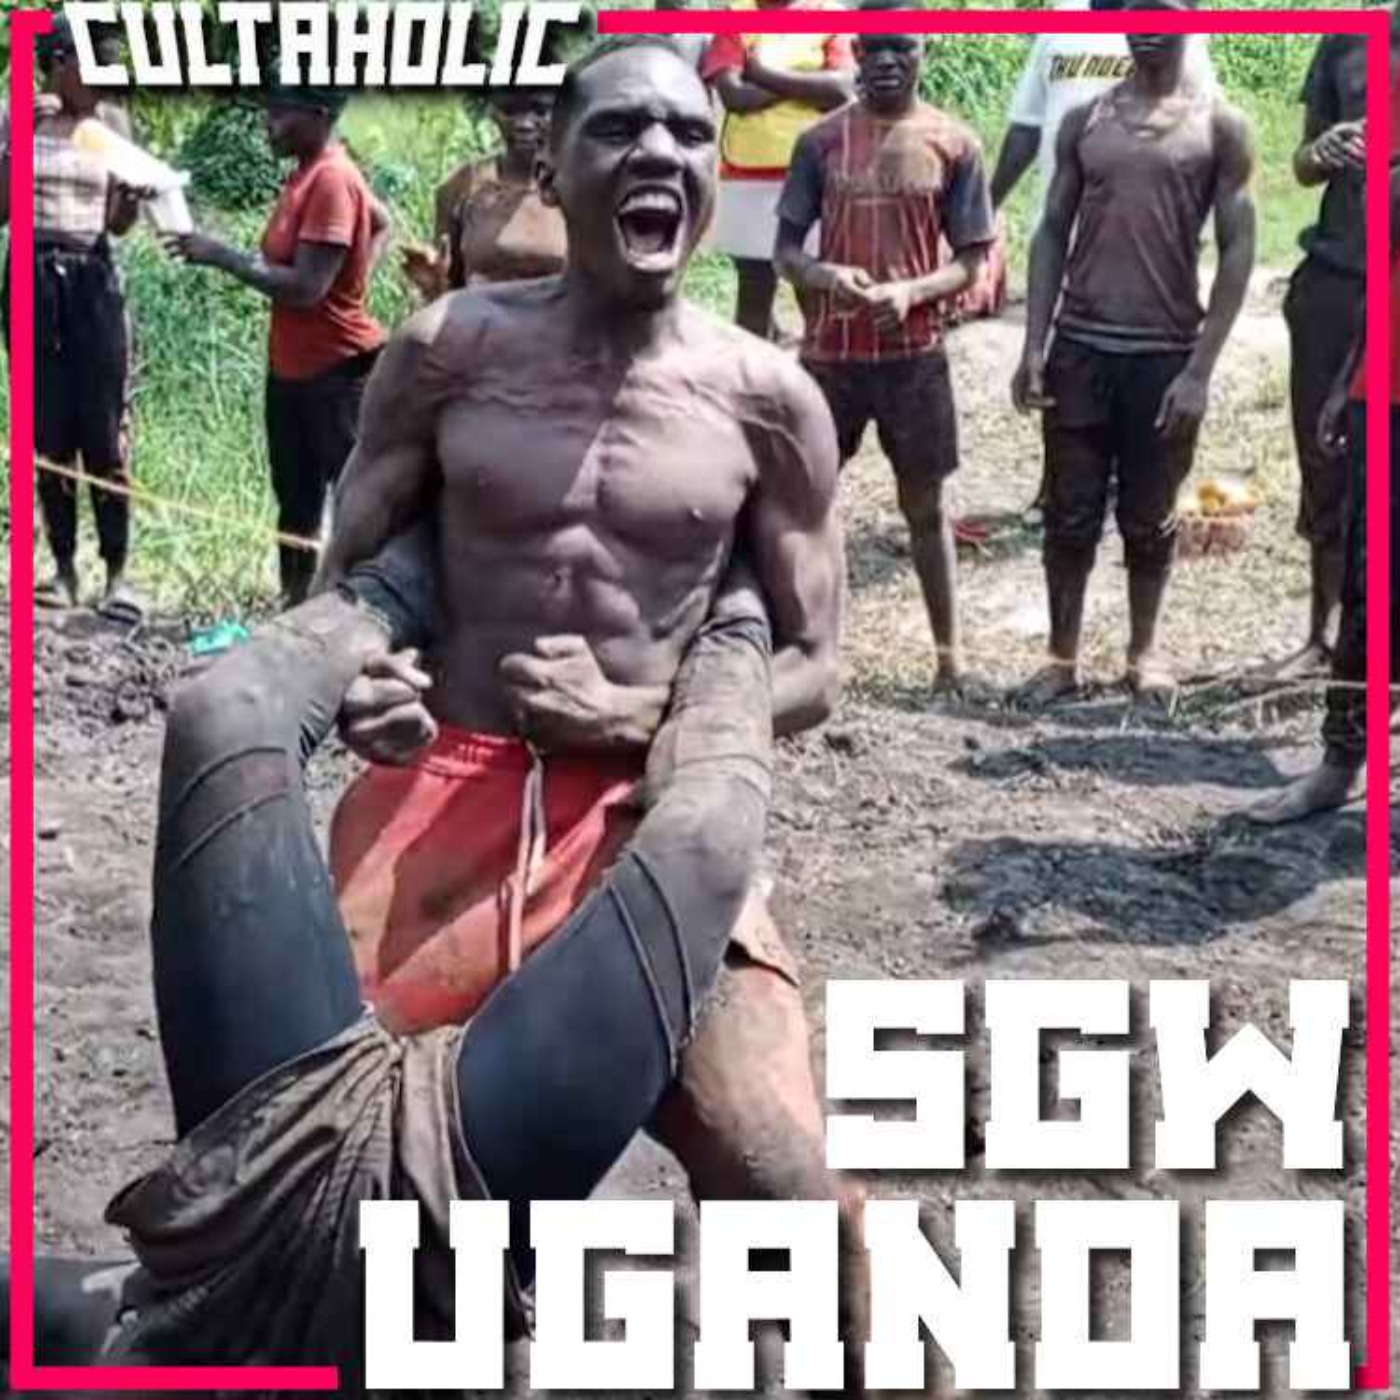 Exclusive - The Ugandan Wrestling Promotion going VIRAL and changing young African lives!